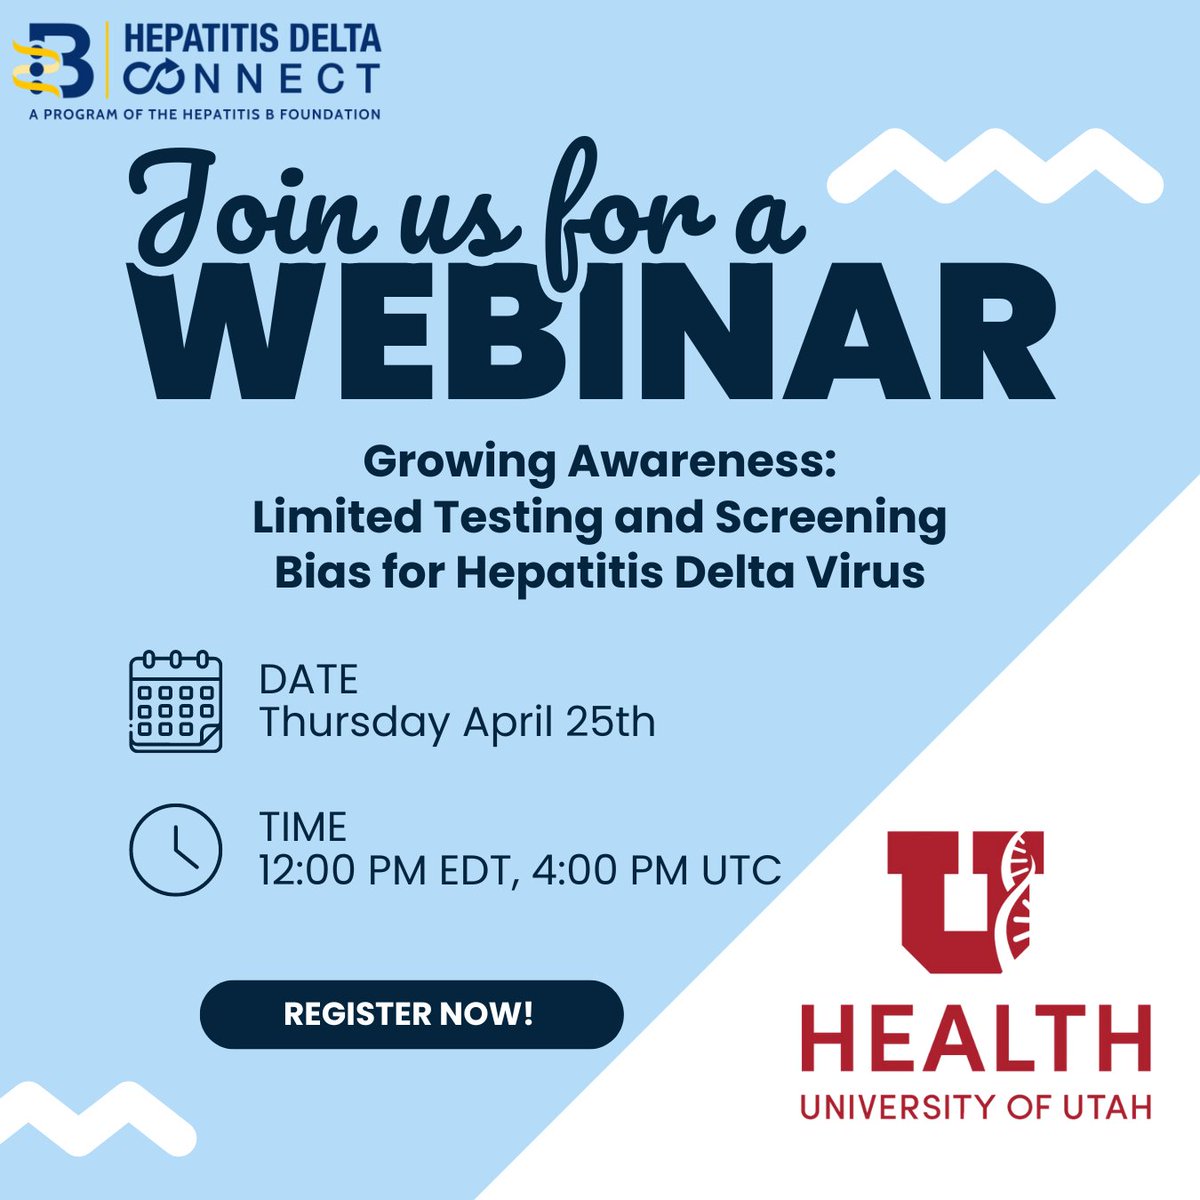 WEBINAR: 📅Thursday, April 25 | ⏲️12pm ET / 4pm UTC 🗣️ Hepatitis Delta Connect's spring quarterly webinar will feature Dr. Melodie Weller from the University of Utah School of Dentistry and School of Medicine Department of Pathology. REGISTER ➡️ ow.ly/6gO750R6B9O